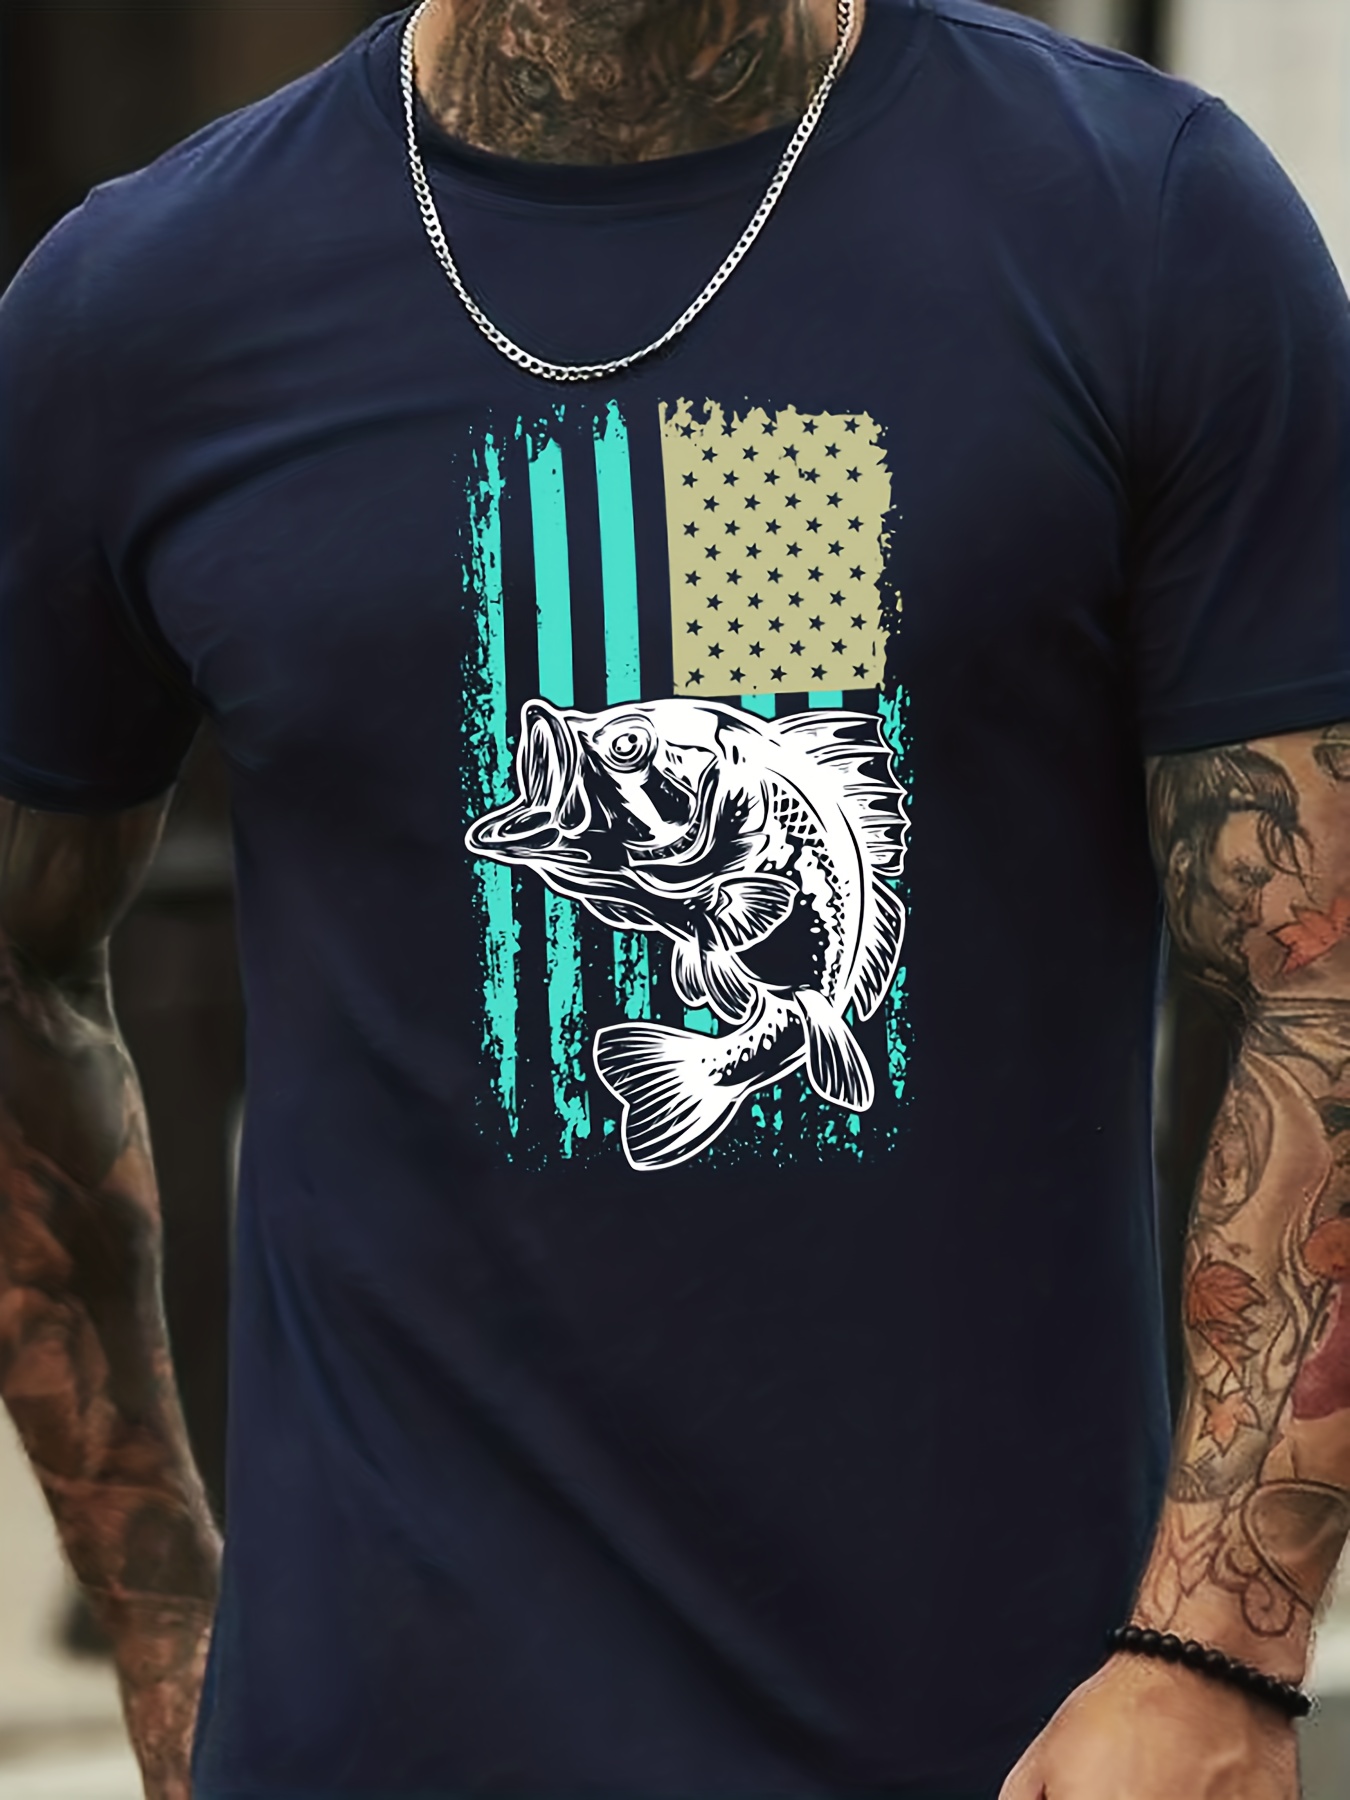 3D Fish Print, Men's Graphic Design Crew Neck Novel T-Shirt, Casual Comfy Tees Tshirts for Summer, Men's Clothing Tops for Daily Vacation Resorts